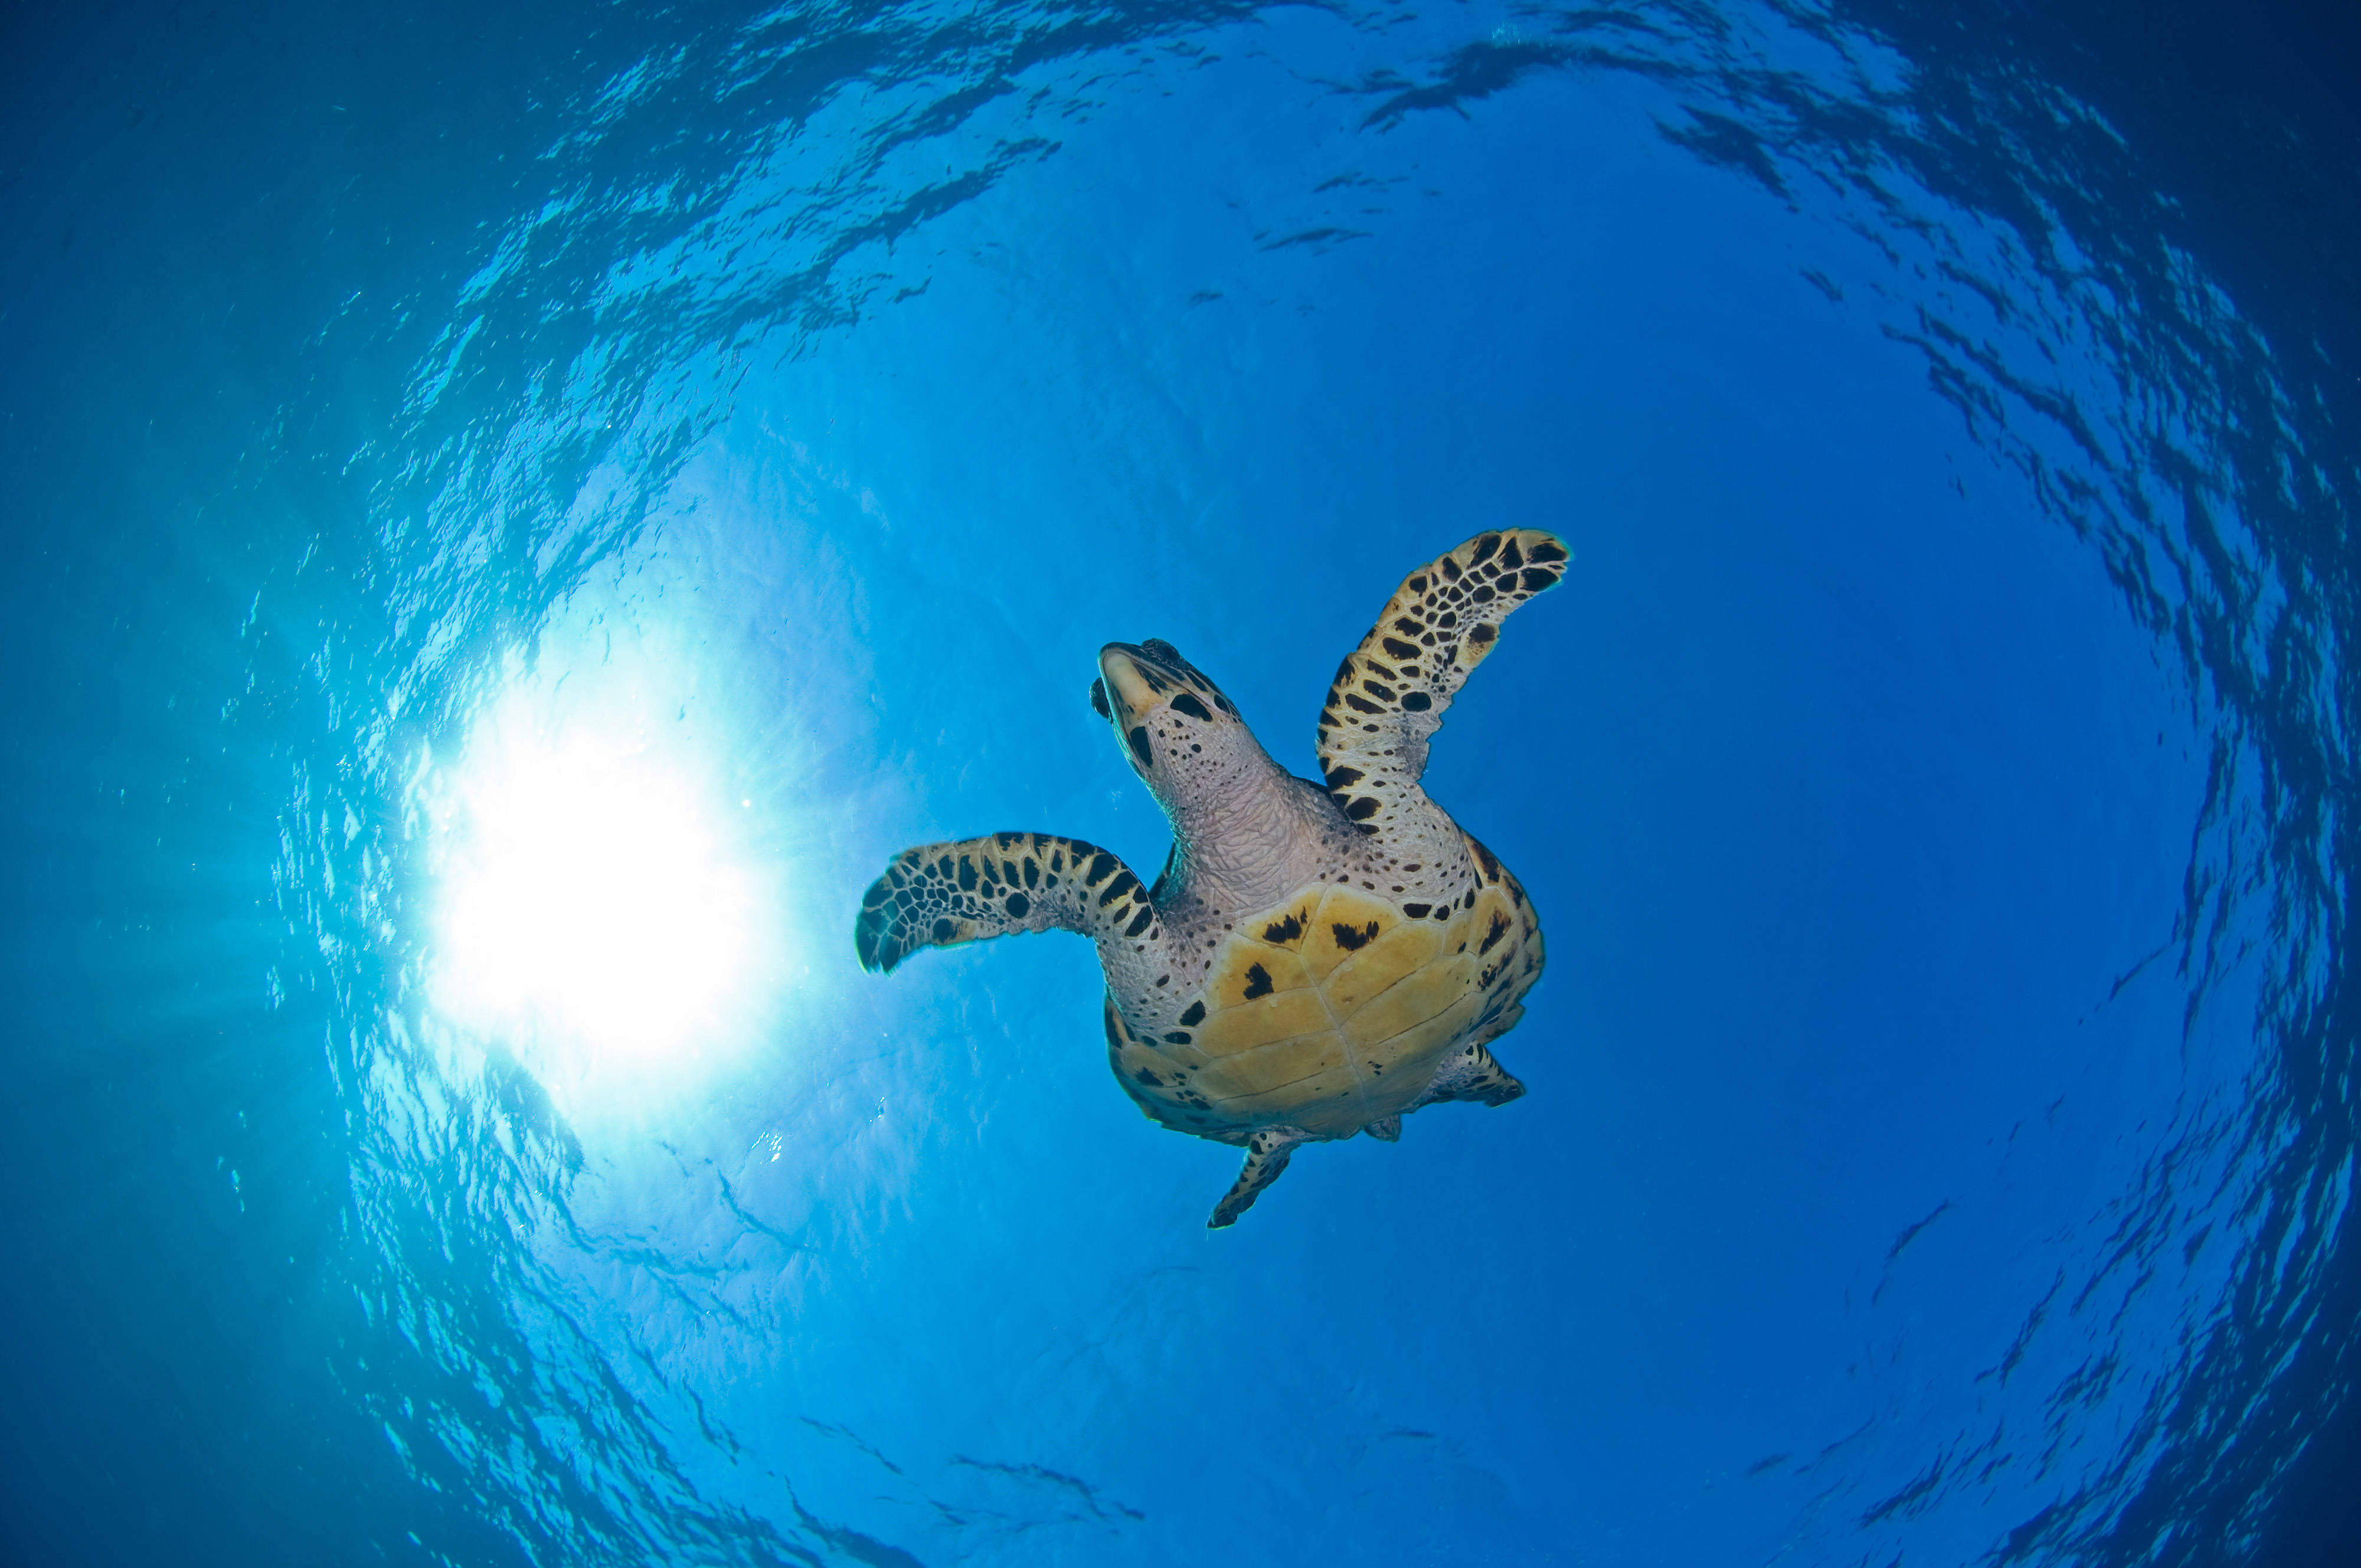 A skyward image of a hawksbill sea turtle gliding through clear blue ocean water. Above the turtle is the ocean surface glimmering with sunlight